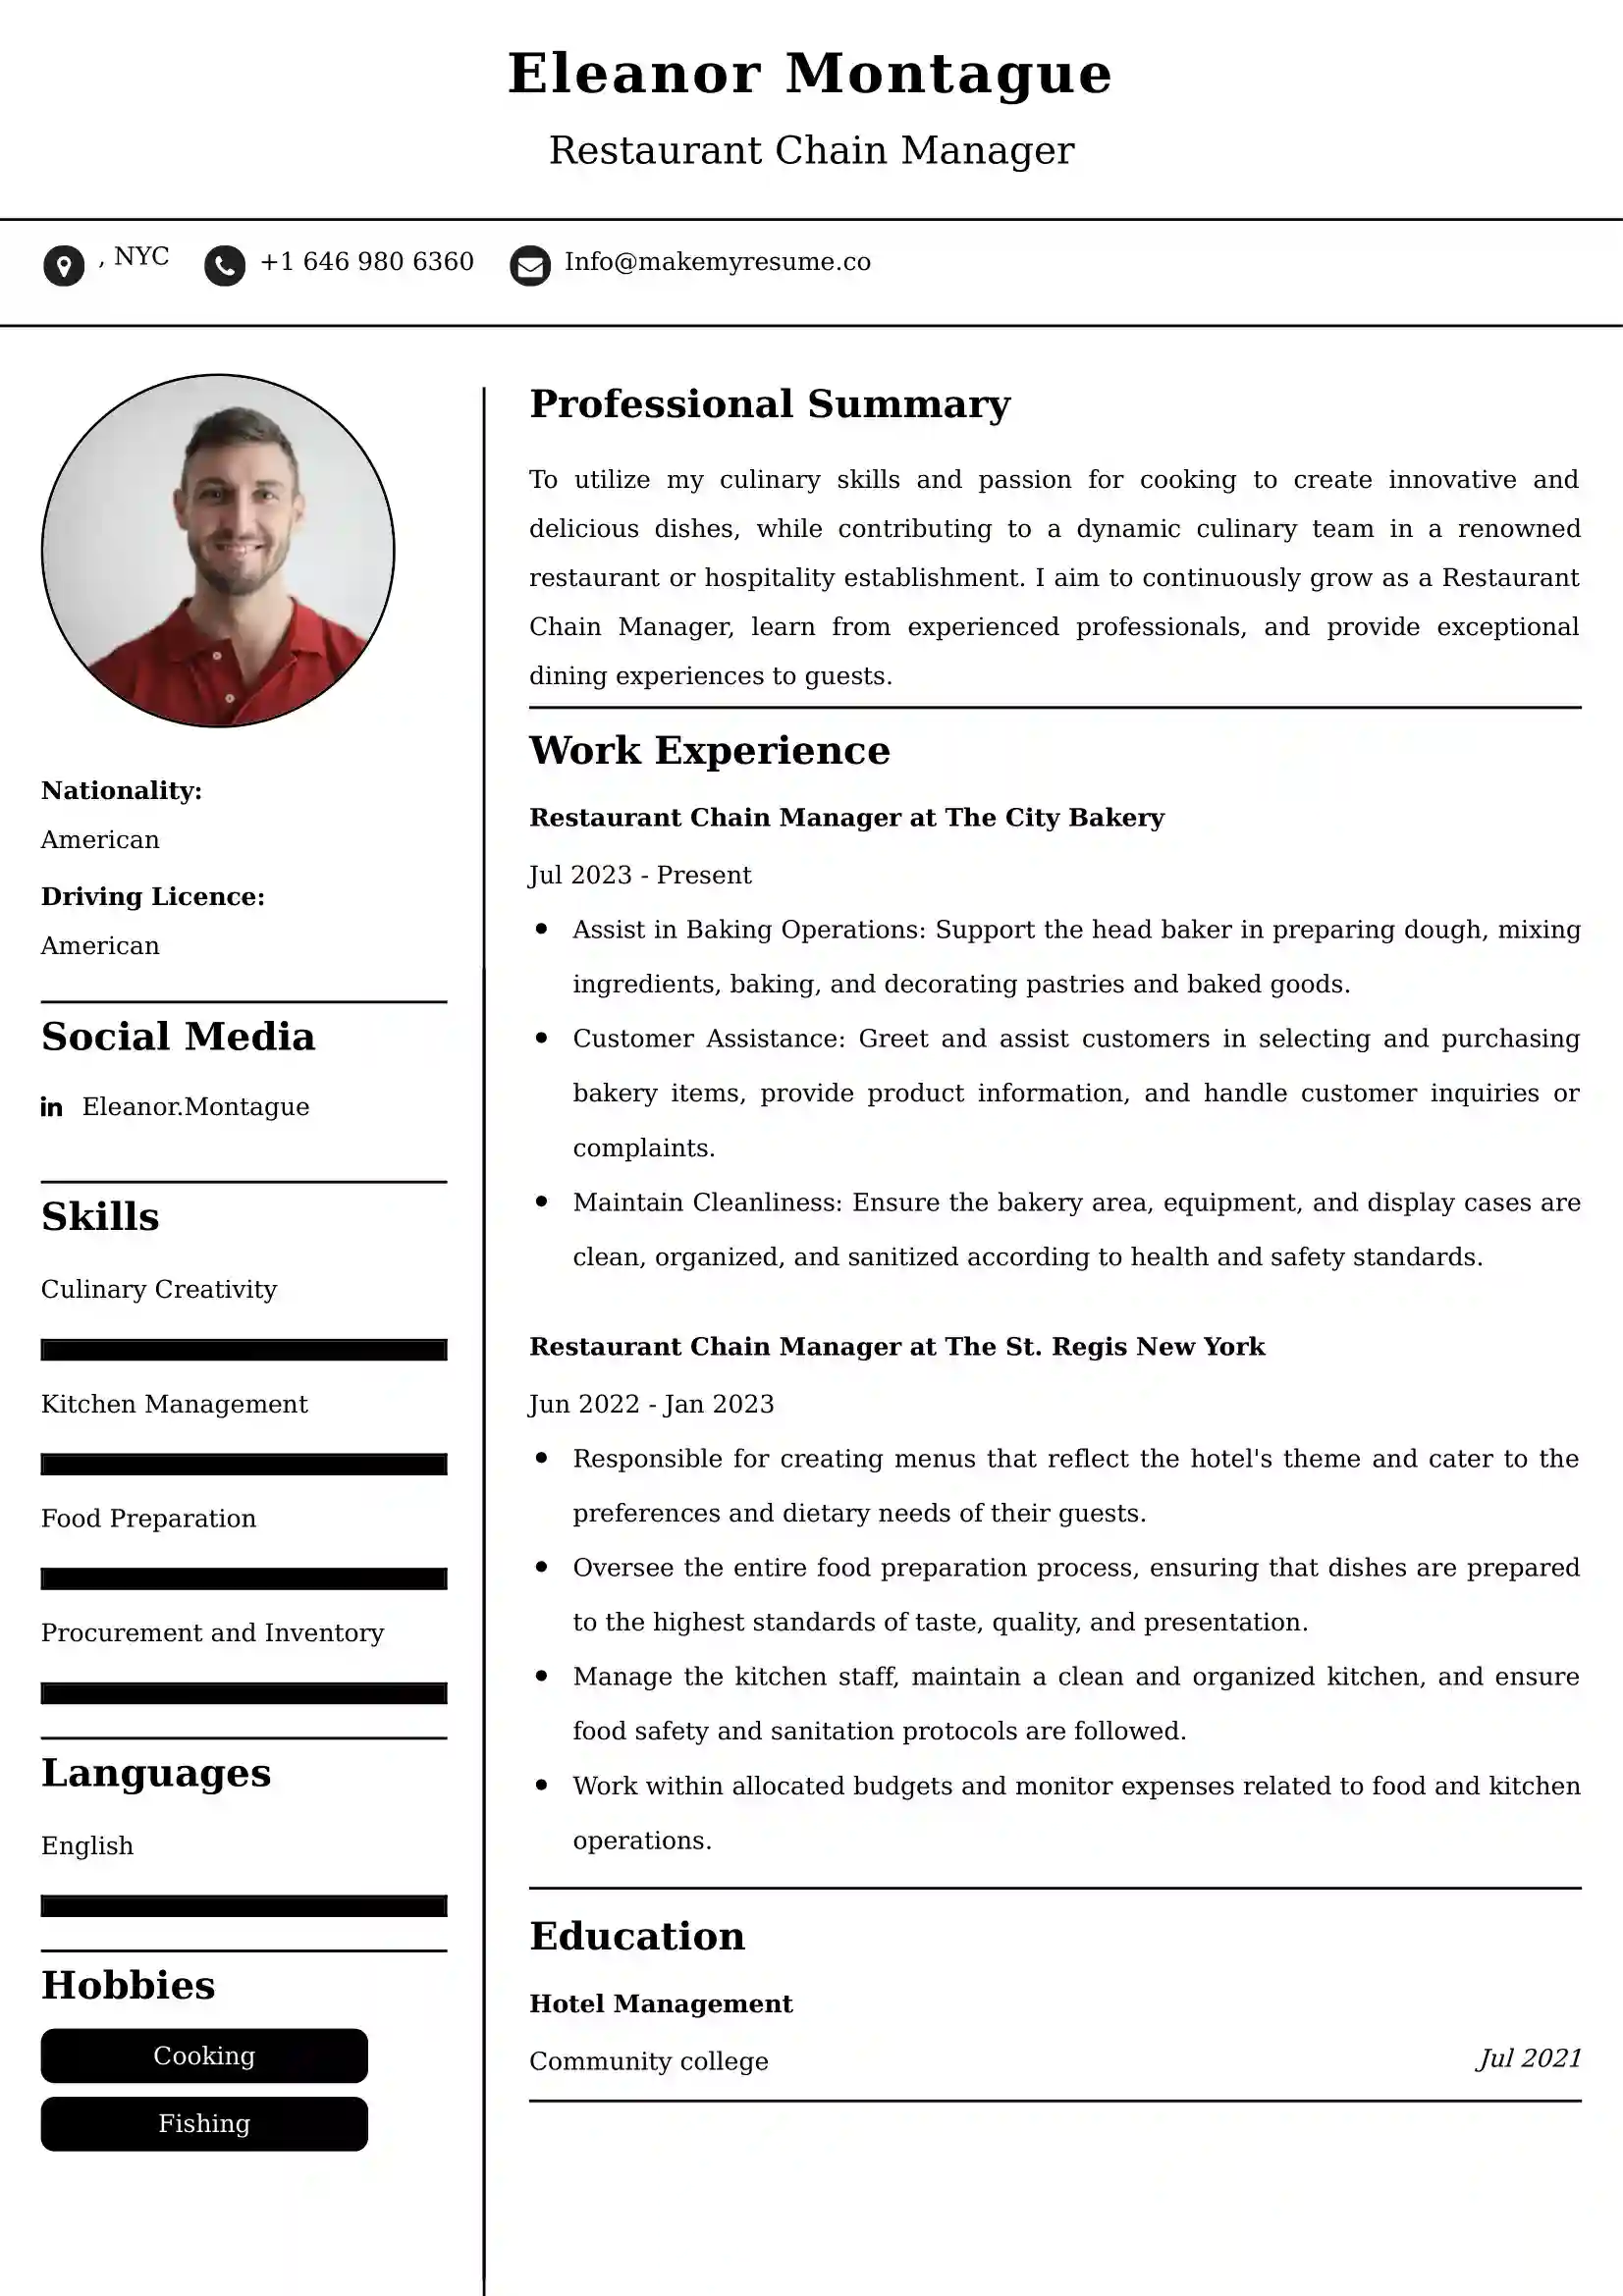 Restaurant Chain Manager Resume Examples - Australian Format and Tips